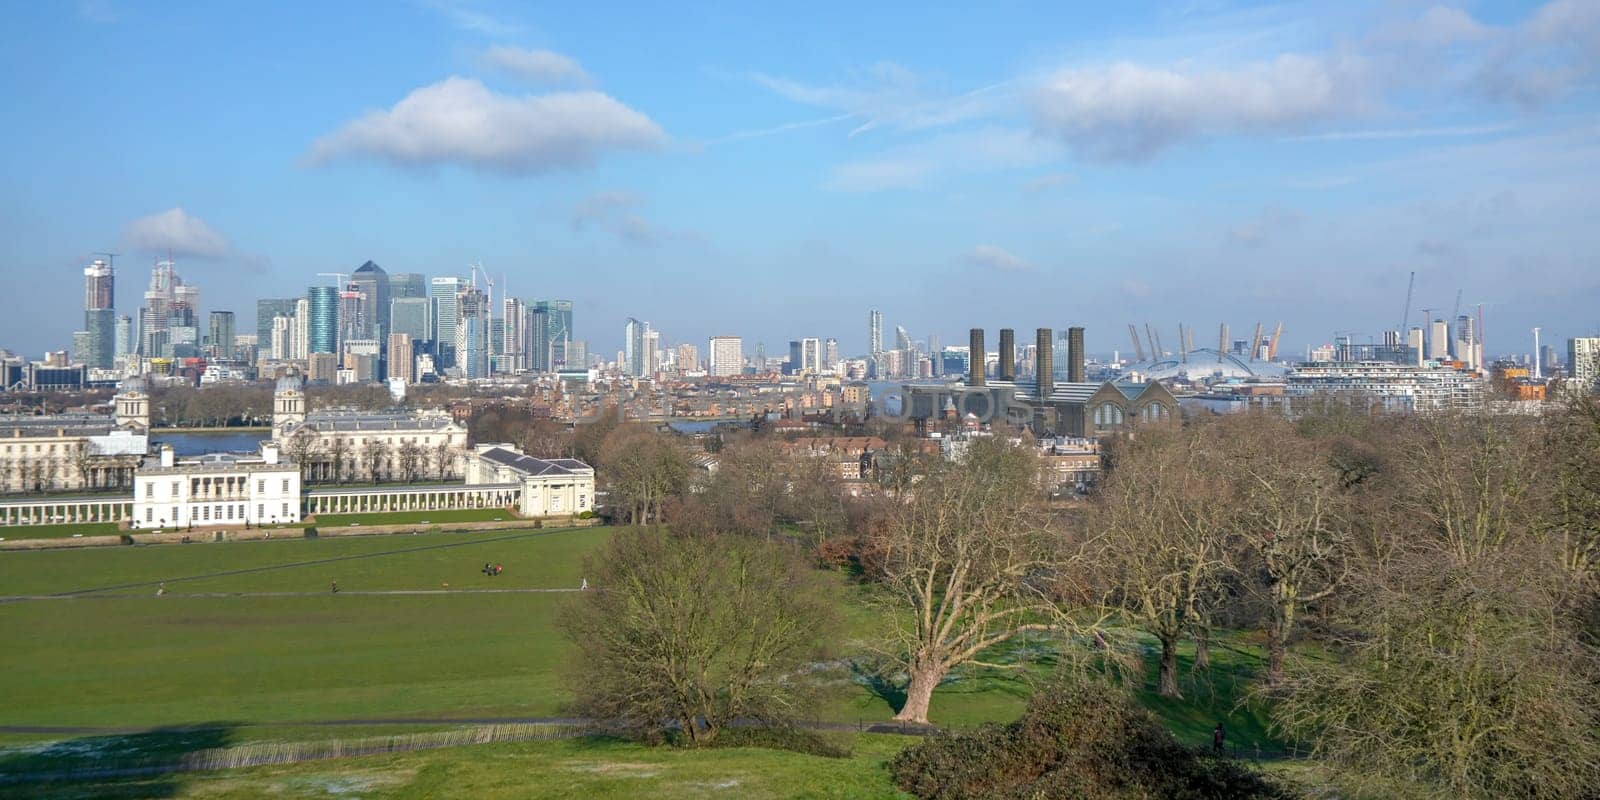 London, United Kingdom - February 02, 2019: Panorama of east London as seen from Greenwich. Skyscrapers at Canary Wharf, National Maritime museum and O2 Arena visible, on sunny spring day by Ivanko